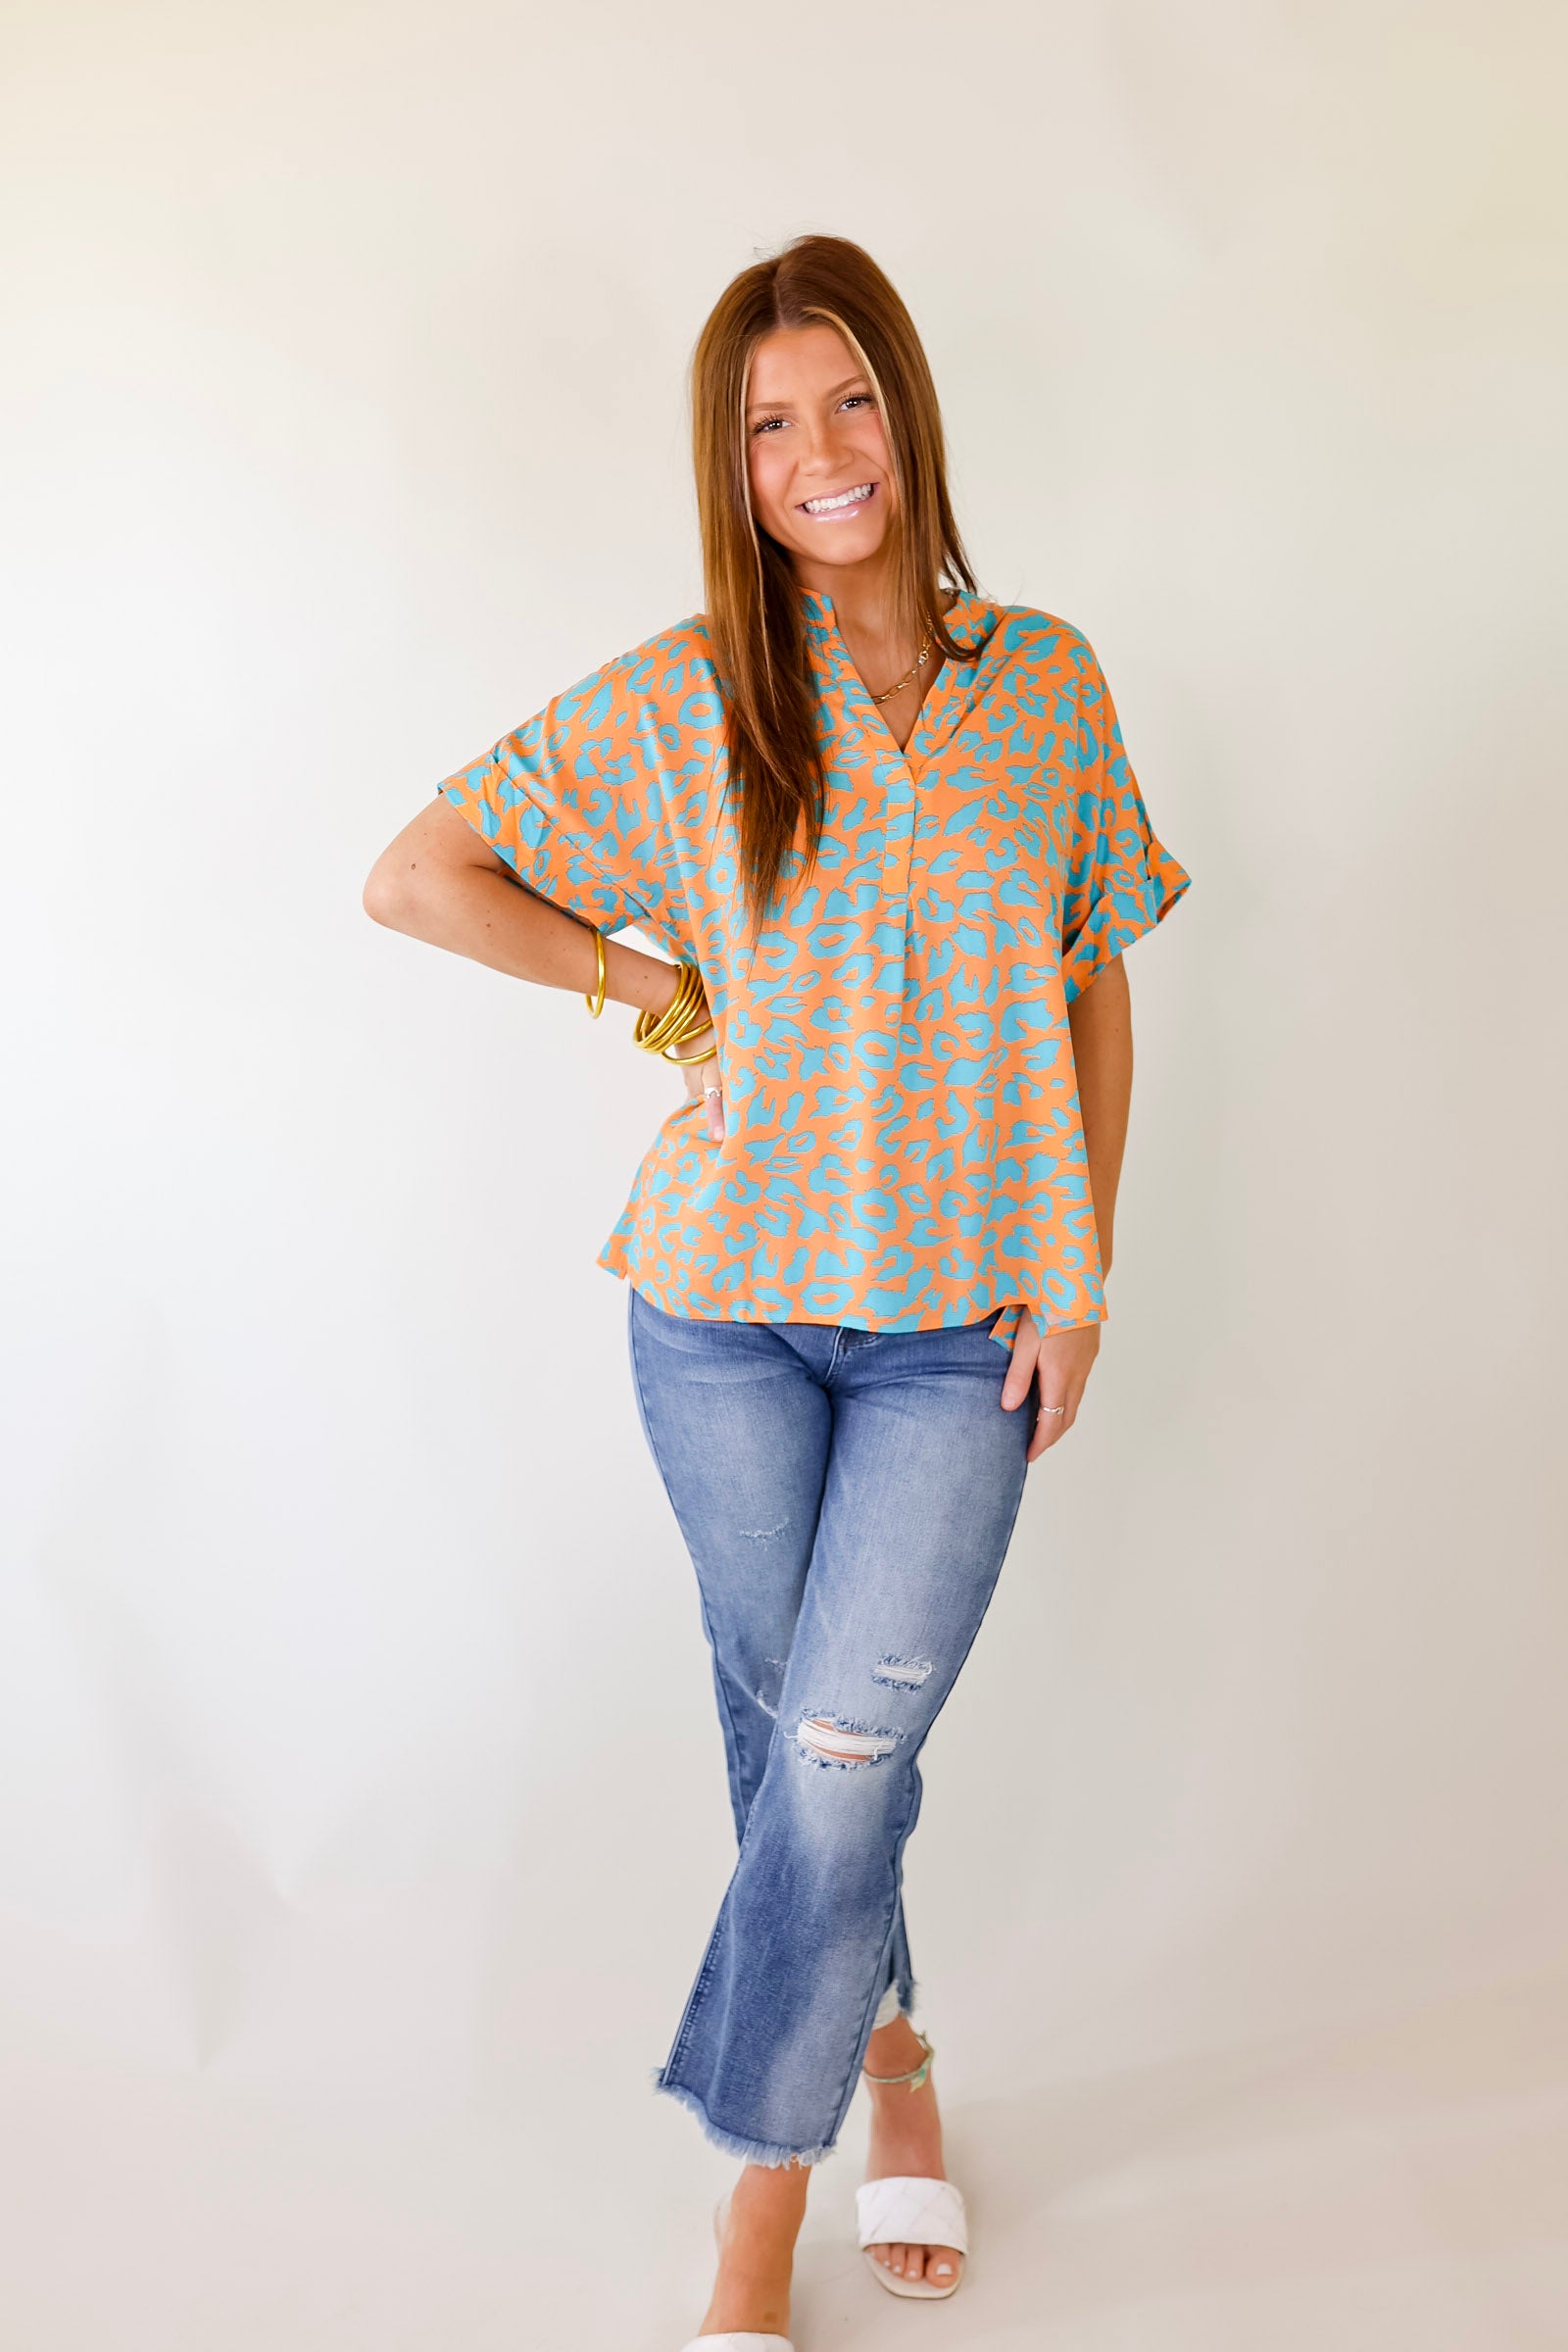 Bold and Beautiful V Neck Teal Leopard Print Top in Orange - Giddy Up Glamour Boutique